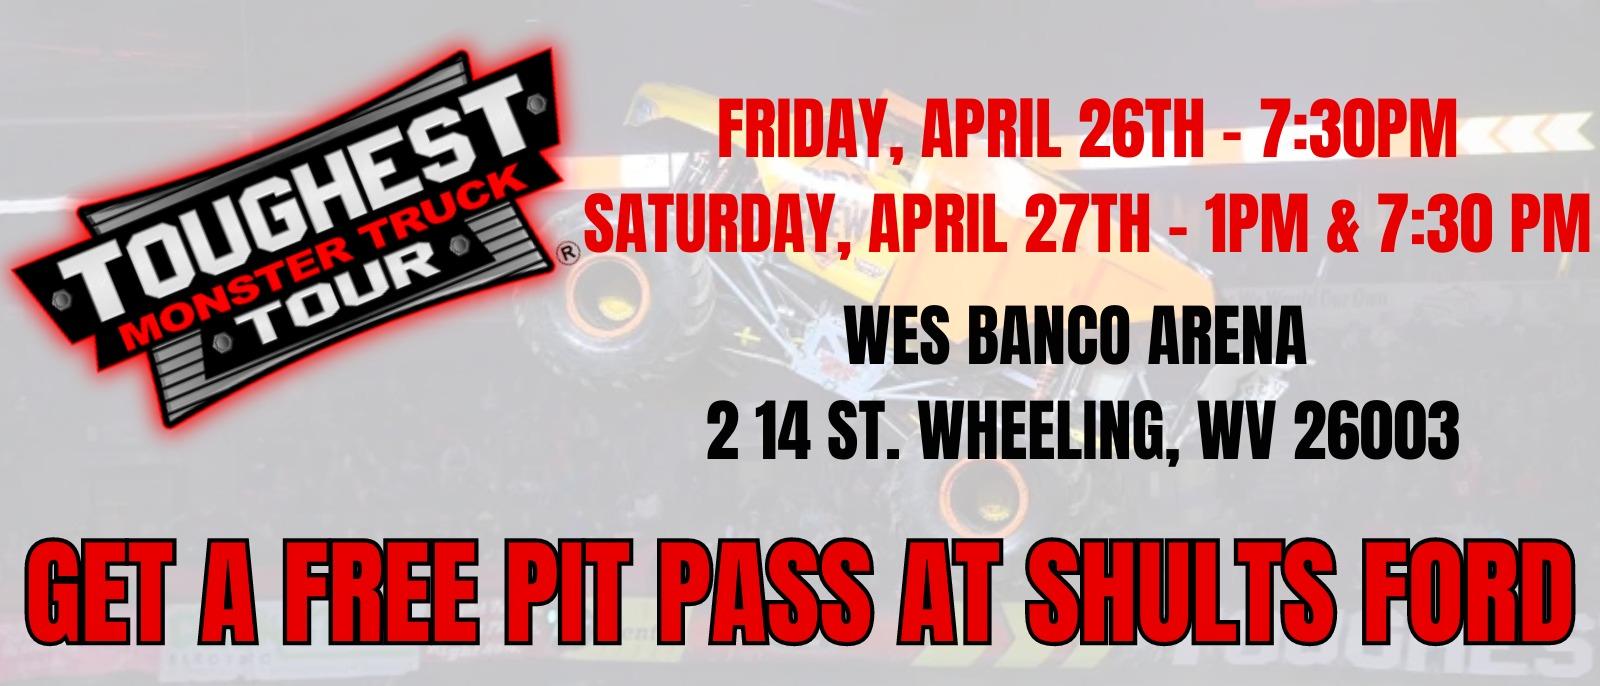 Monster Truck Tour - Get a Free Pit pass at Shults Ford